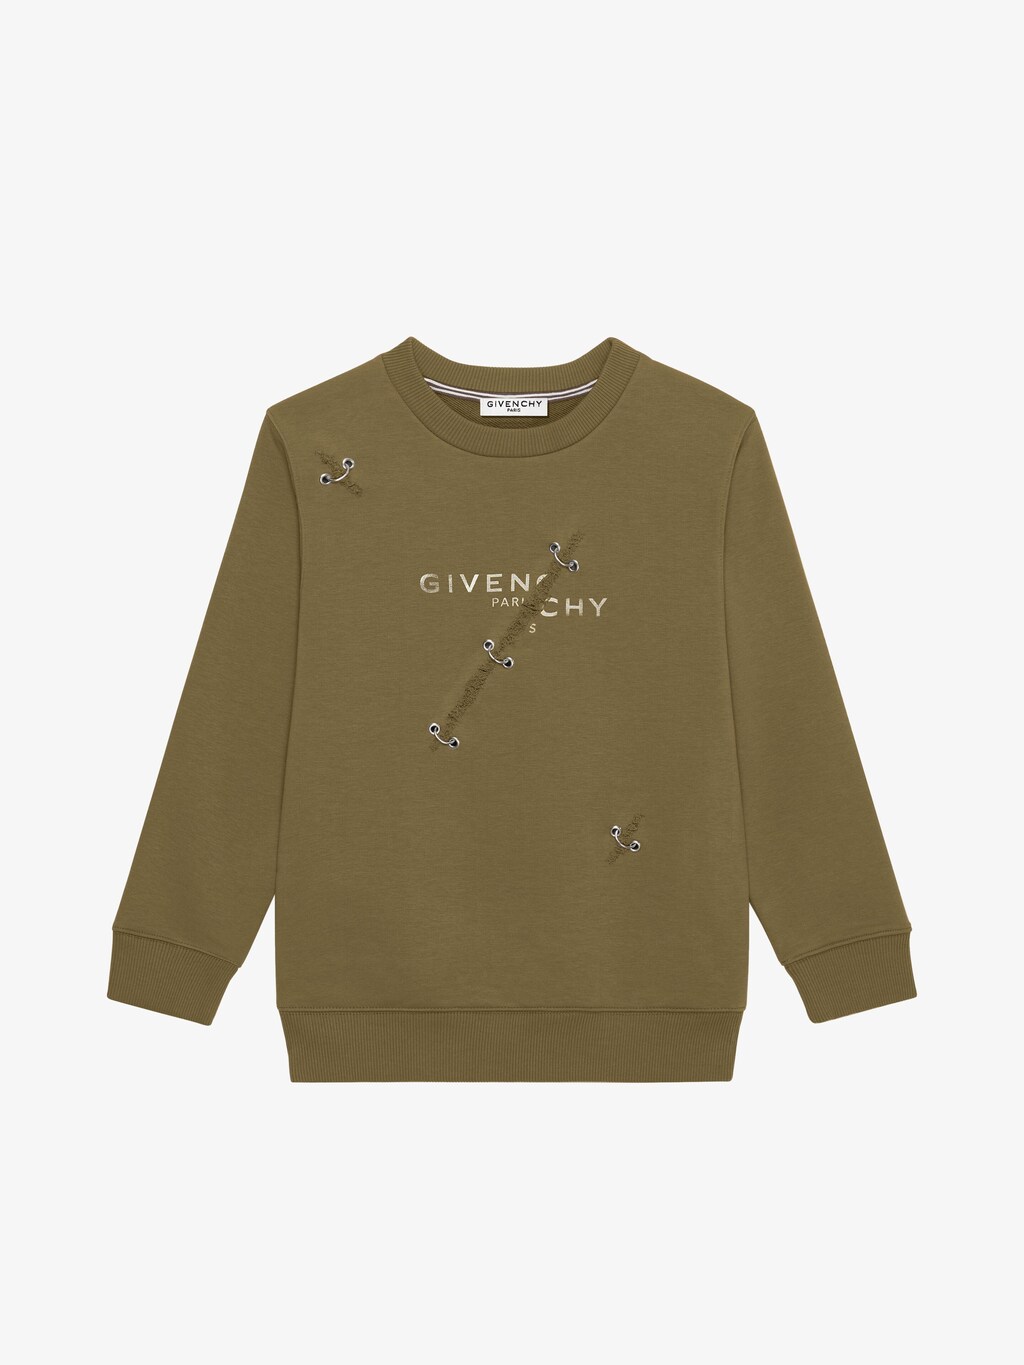 givenchy.com | Sweatshirt in duffle GIVENCHY trompe l'œil